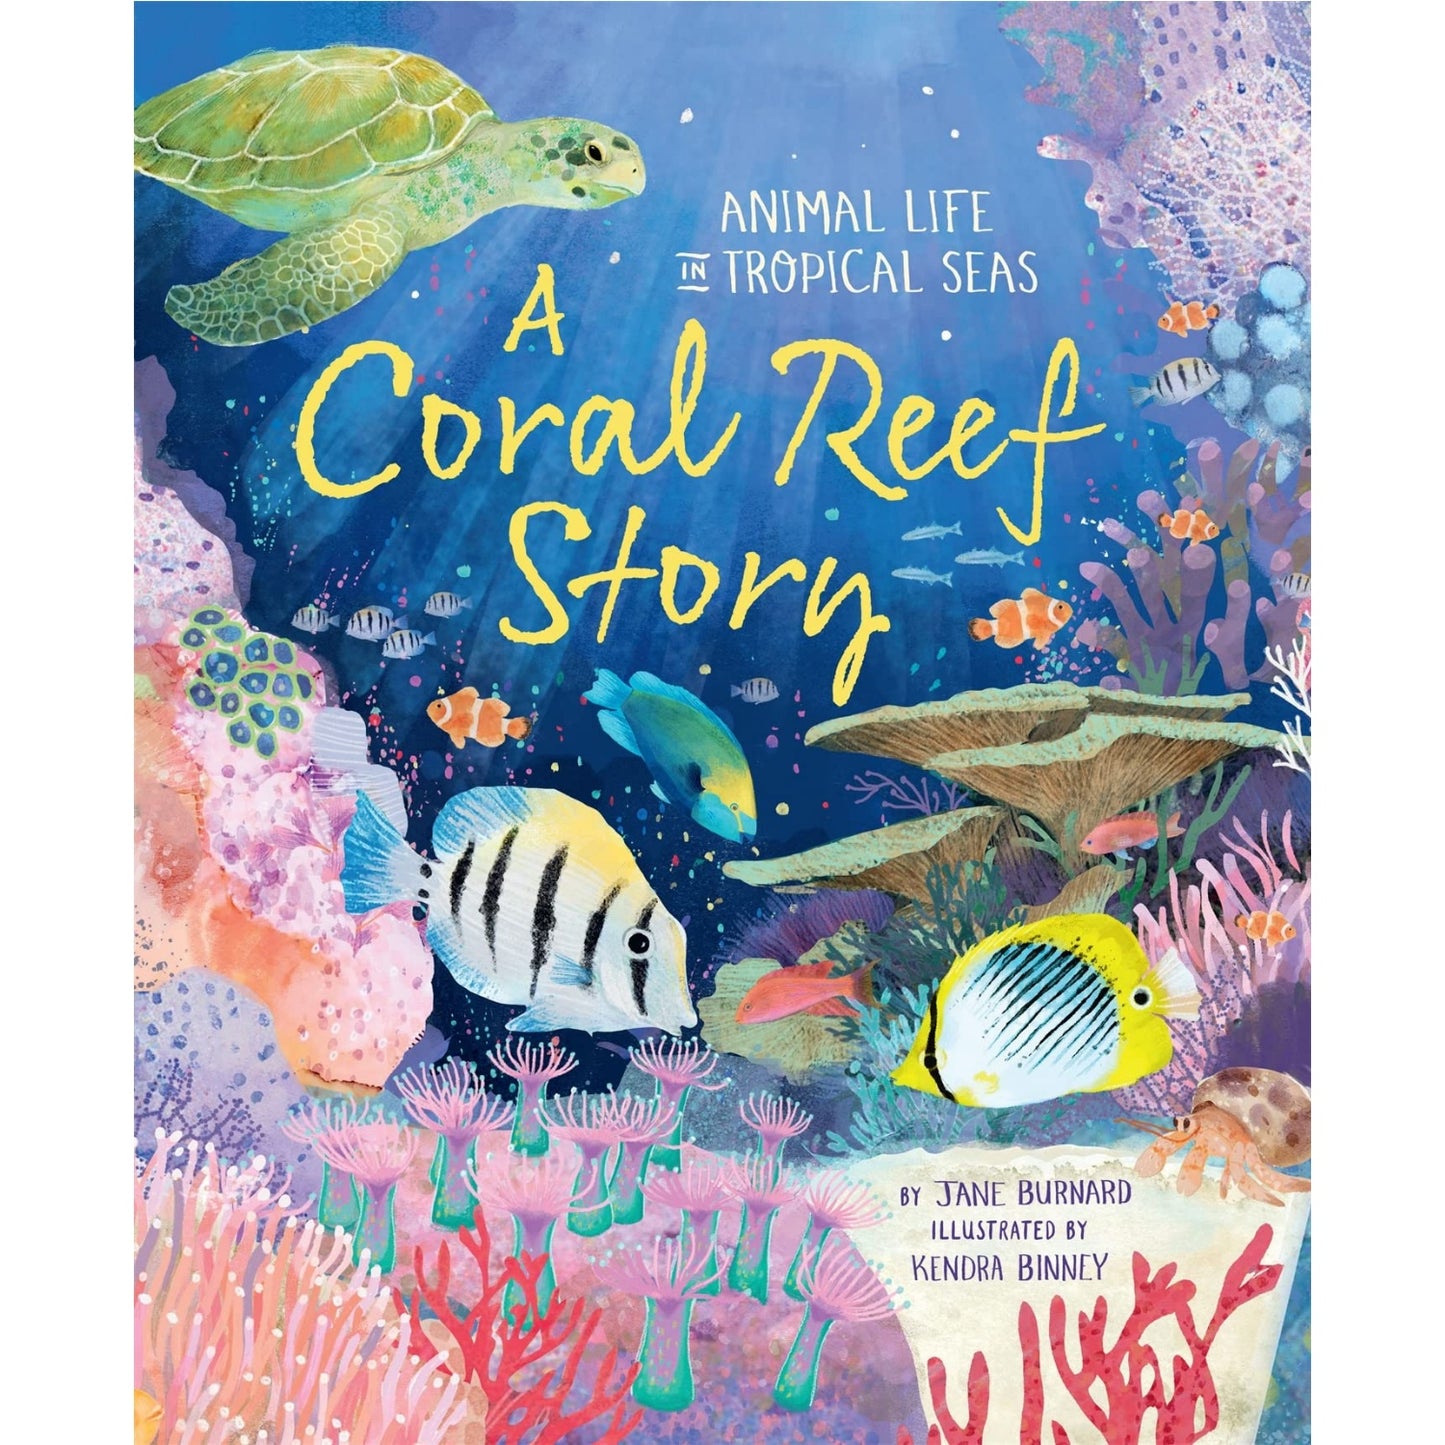 A Coral Reef Story: Animal Life in Tropical Seas | Hardcover | Children’s Book on Oceans & Seas